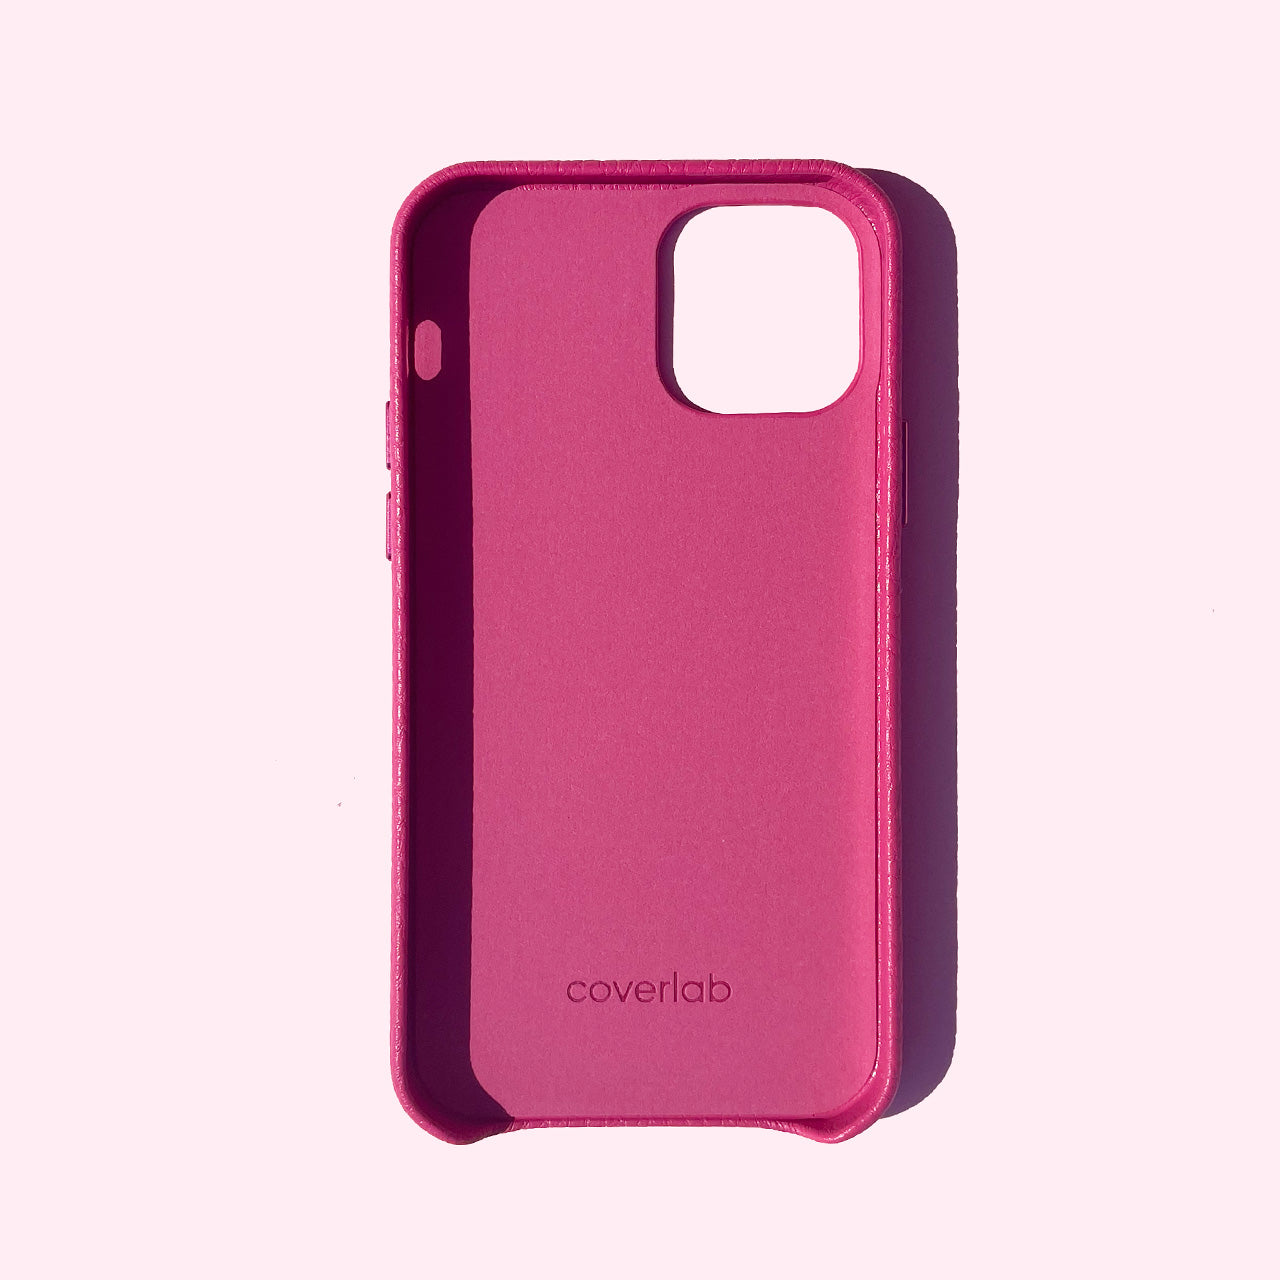 Personalised iPhone 11 Pro Cases & Covers